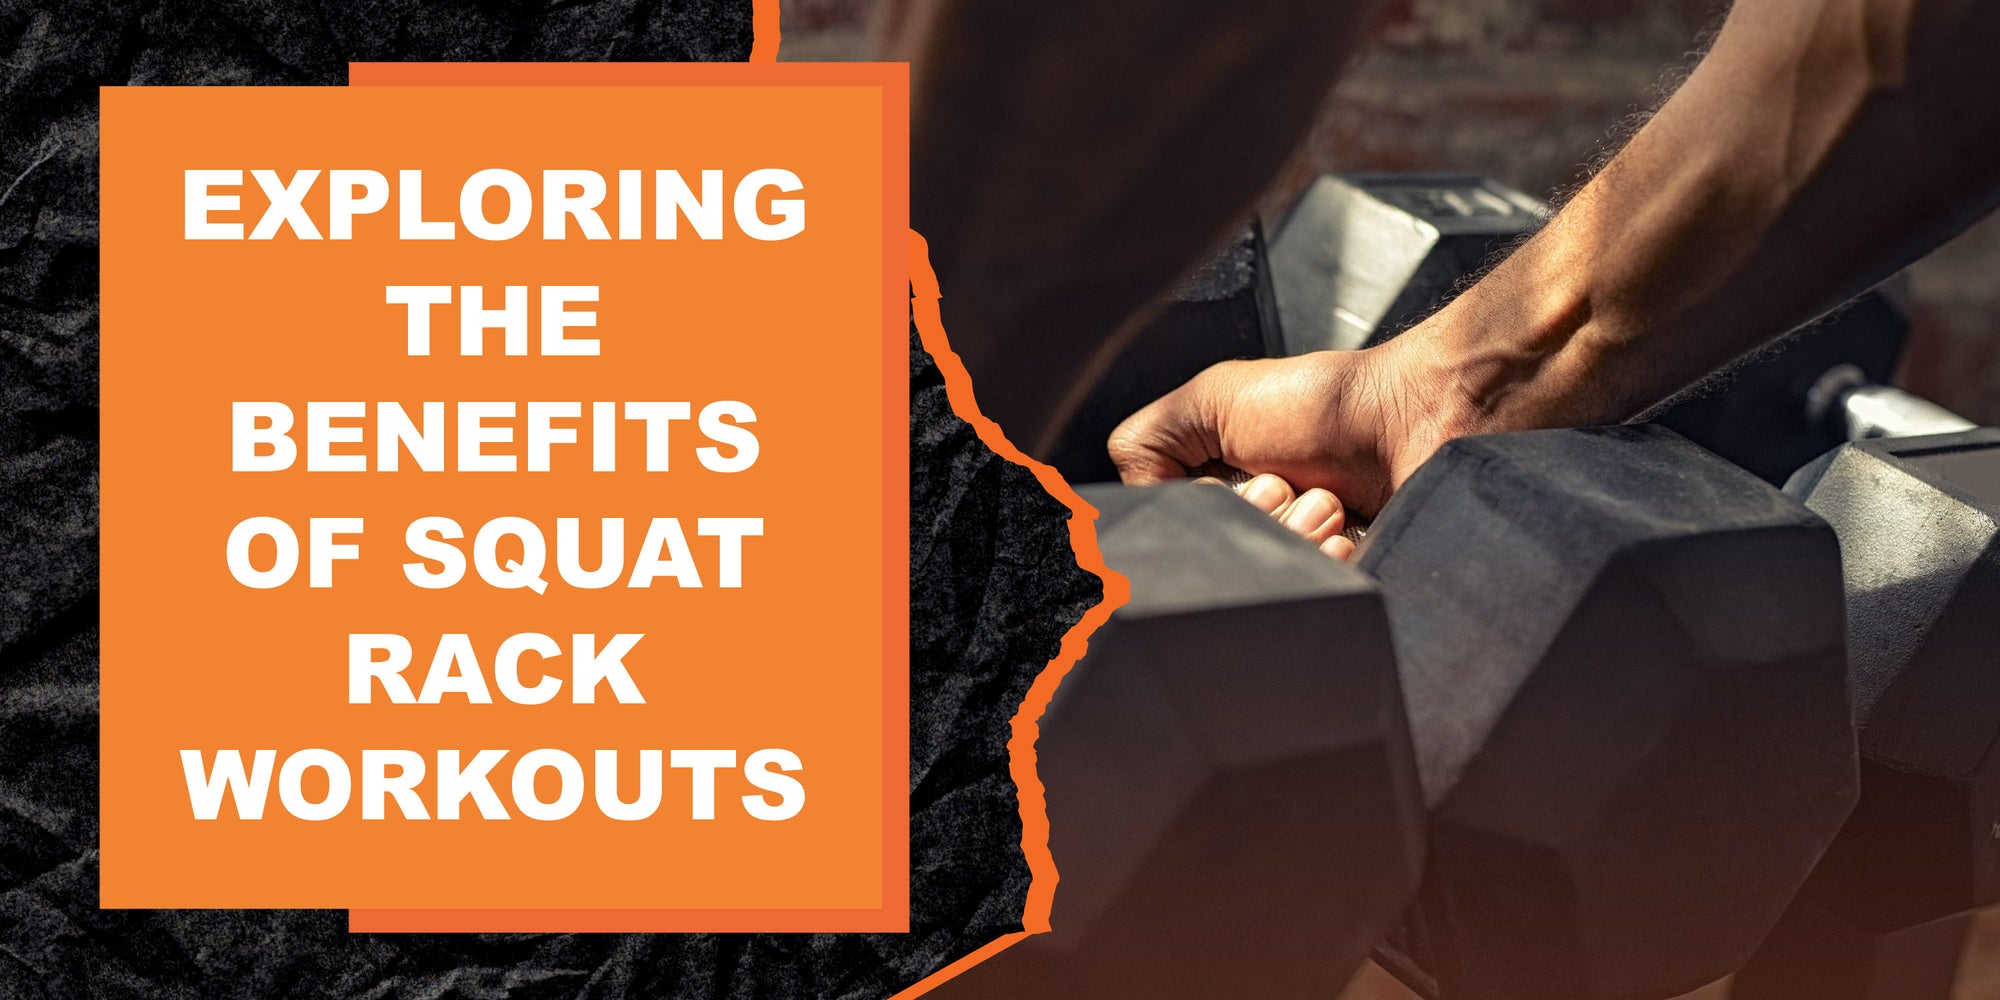 Exploring the Benefits of Squat Rack Workouts